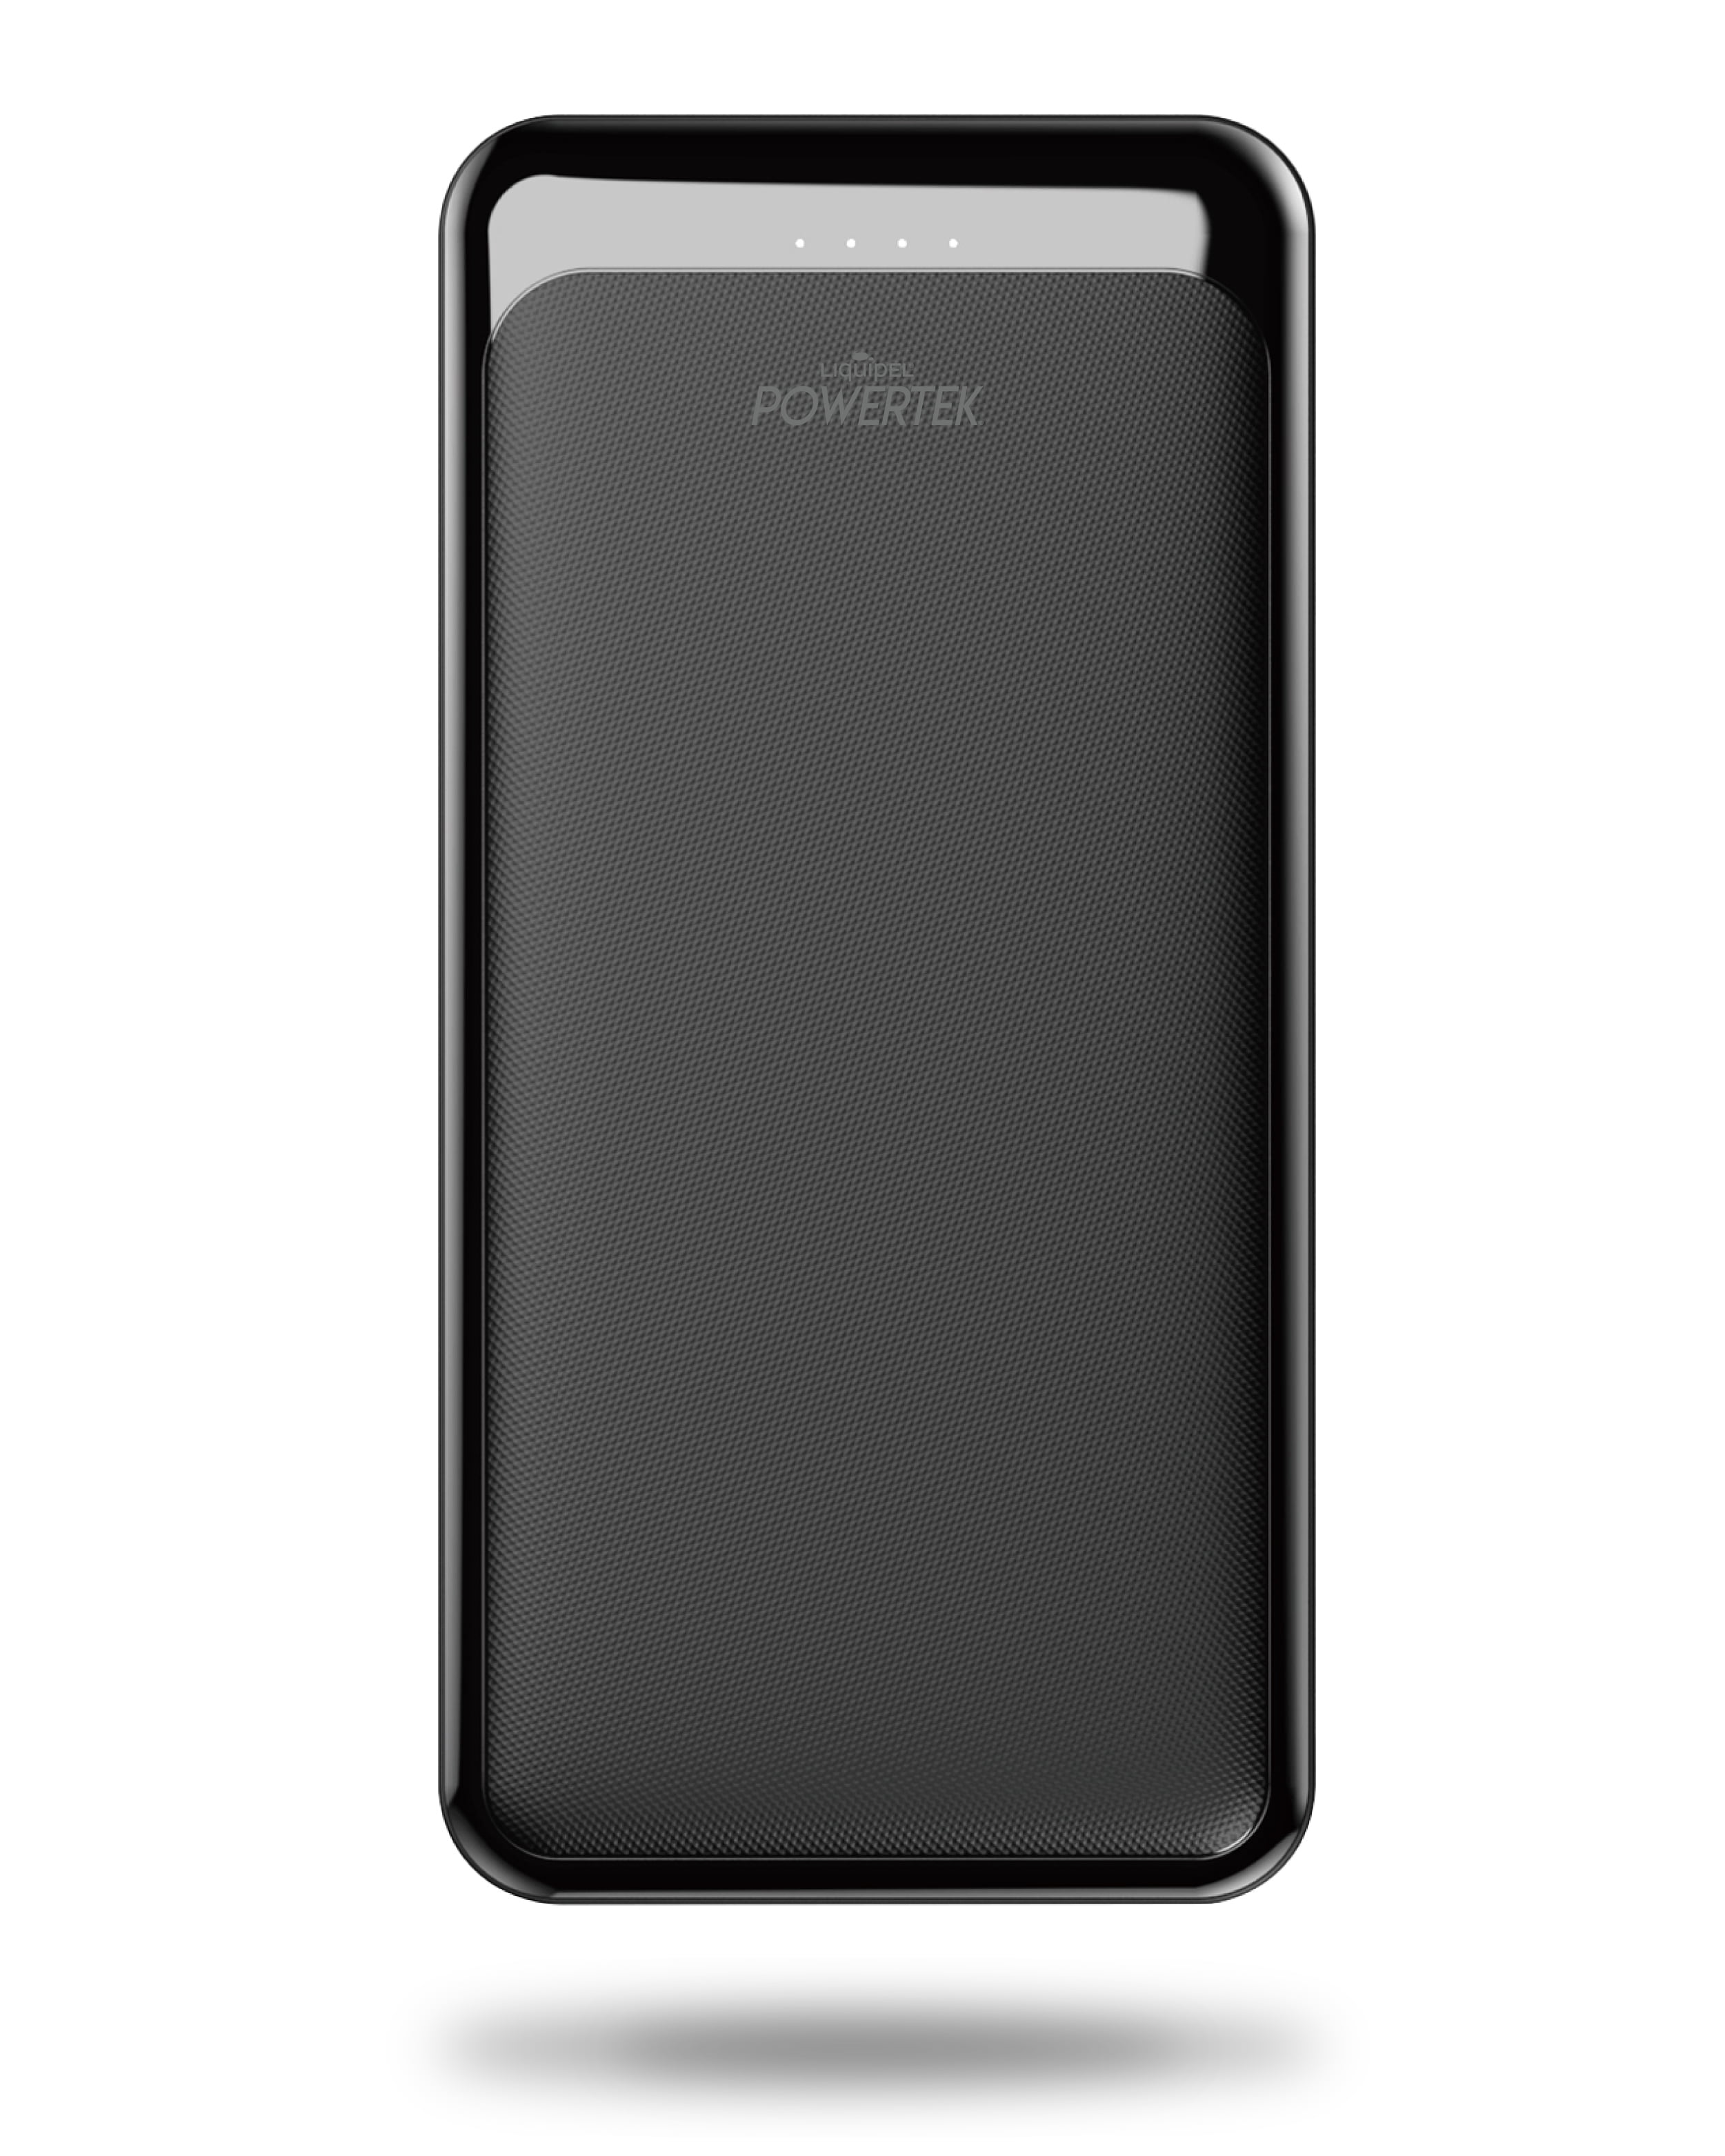 Liquipel Powertek 20,000 mAh Portable Power Bank, Fast Charging Dual USB Output Battery Pack for iPhone, iPad, Galaxy, Android, Pixel, and Tablet (Black) - Walmart.com